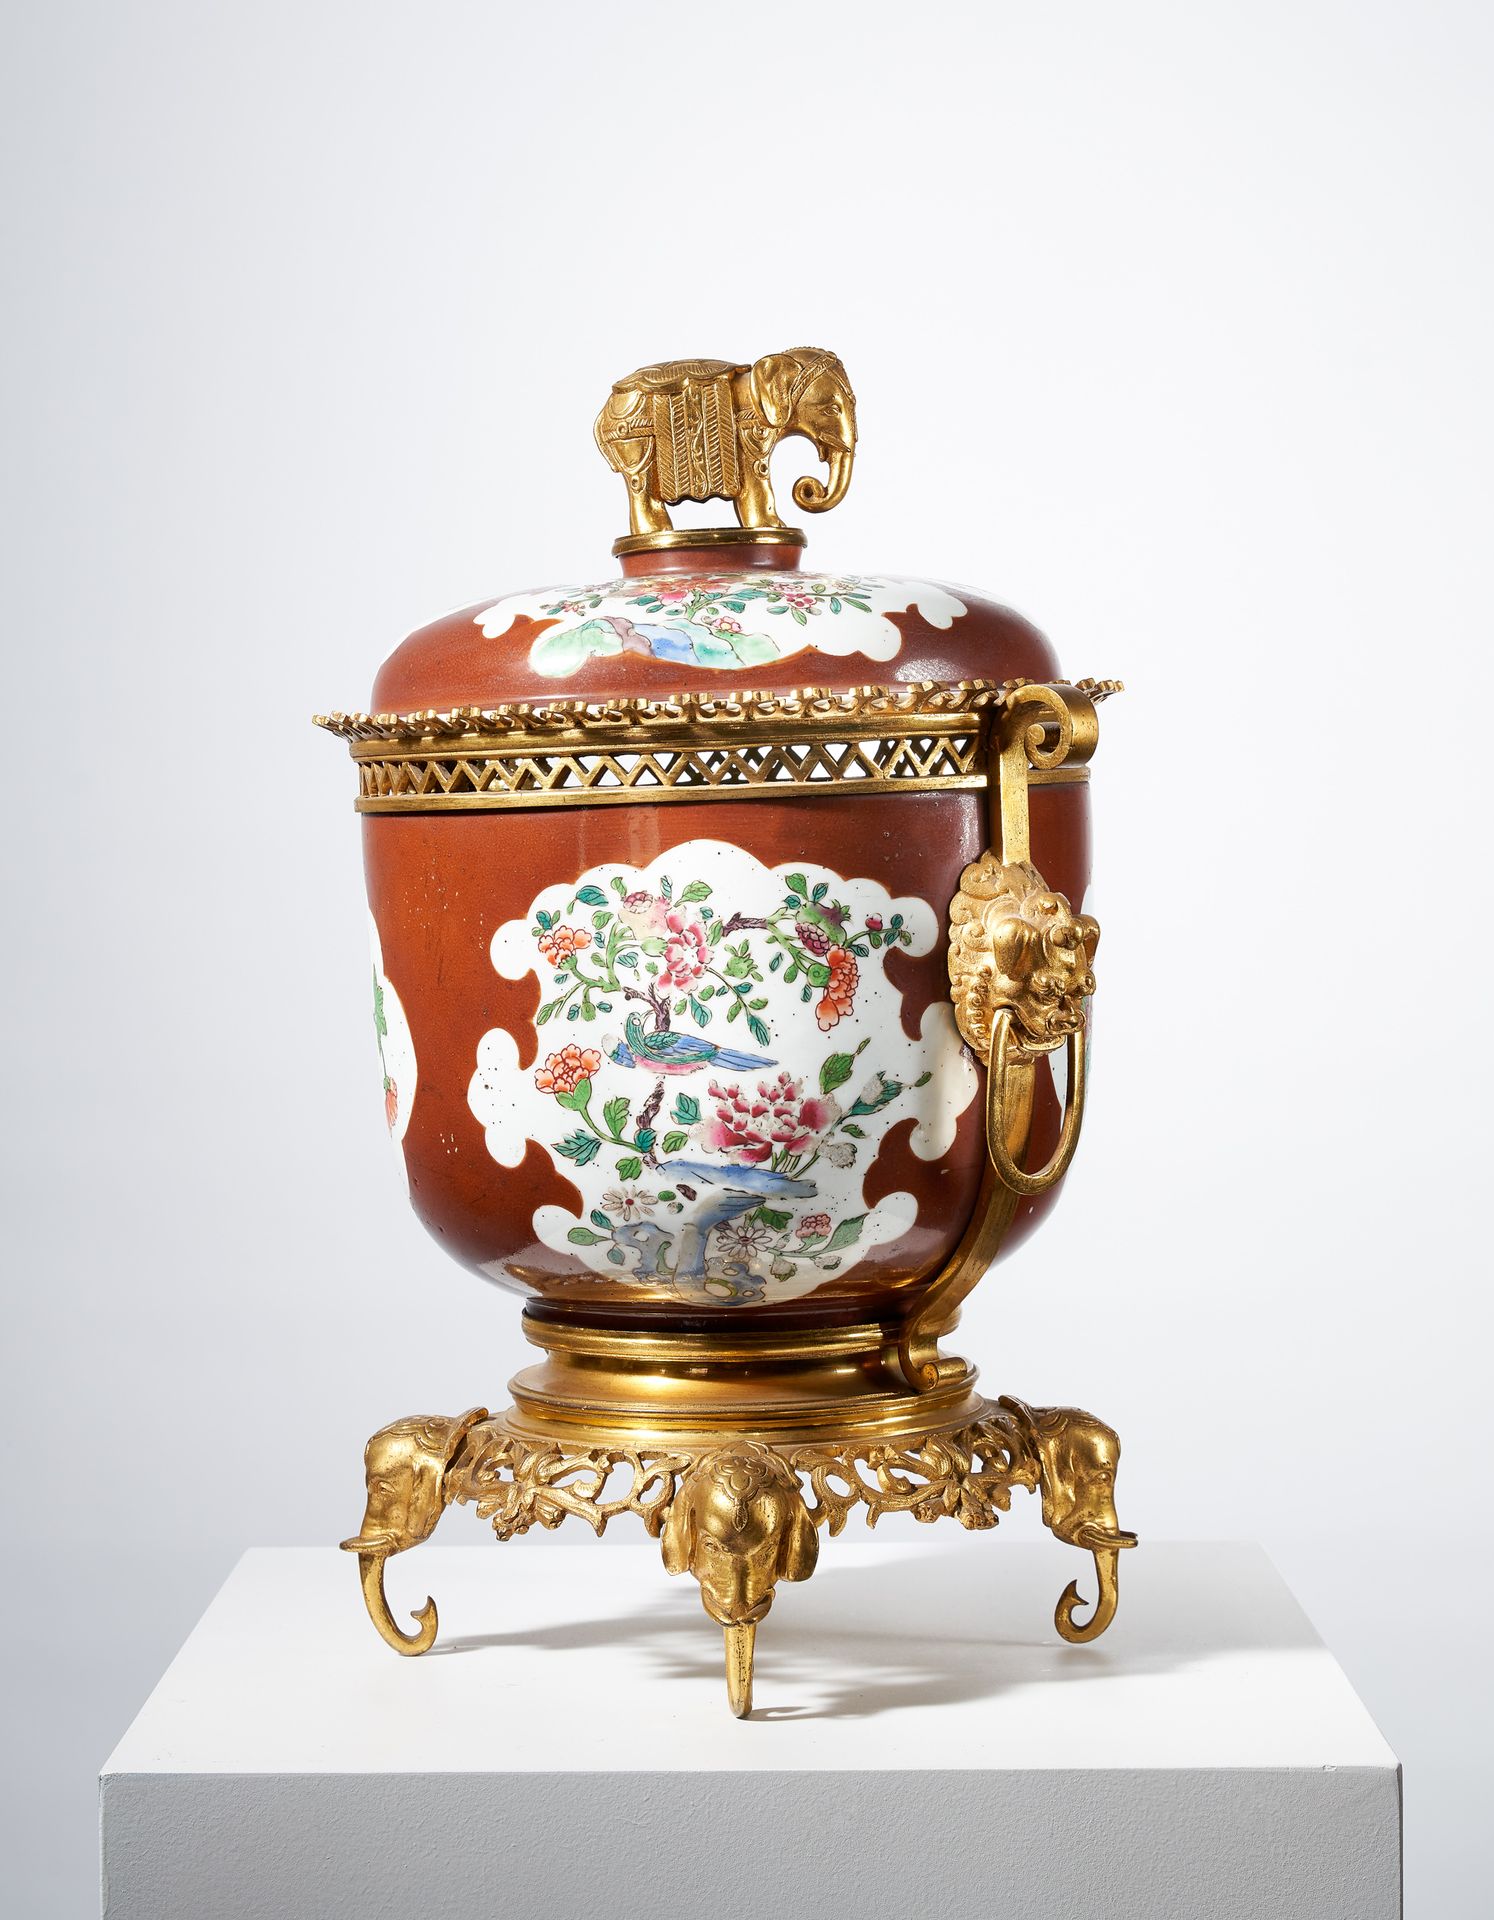 Null QING DYNASTY COVERED VASE

Qing Dynasty (1644-1 911), late 18th century 

C&hellip;